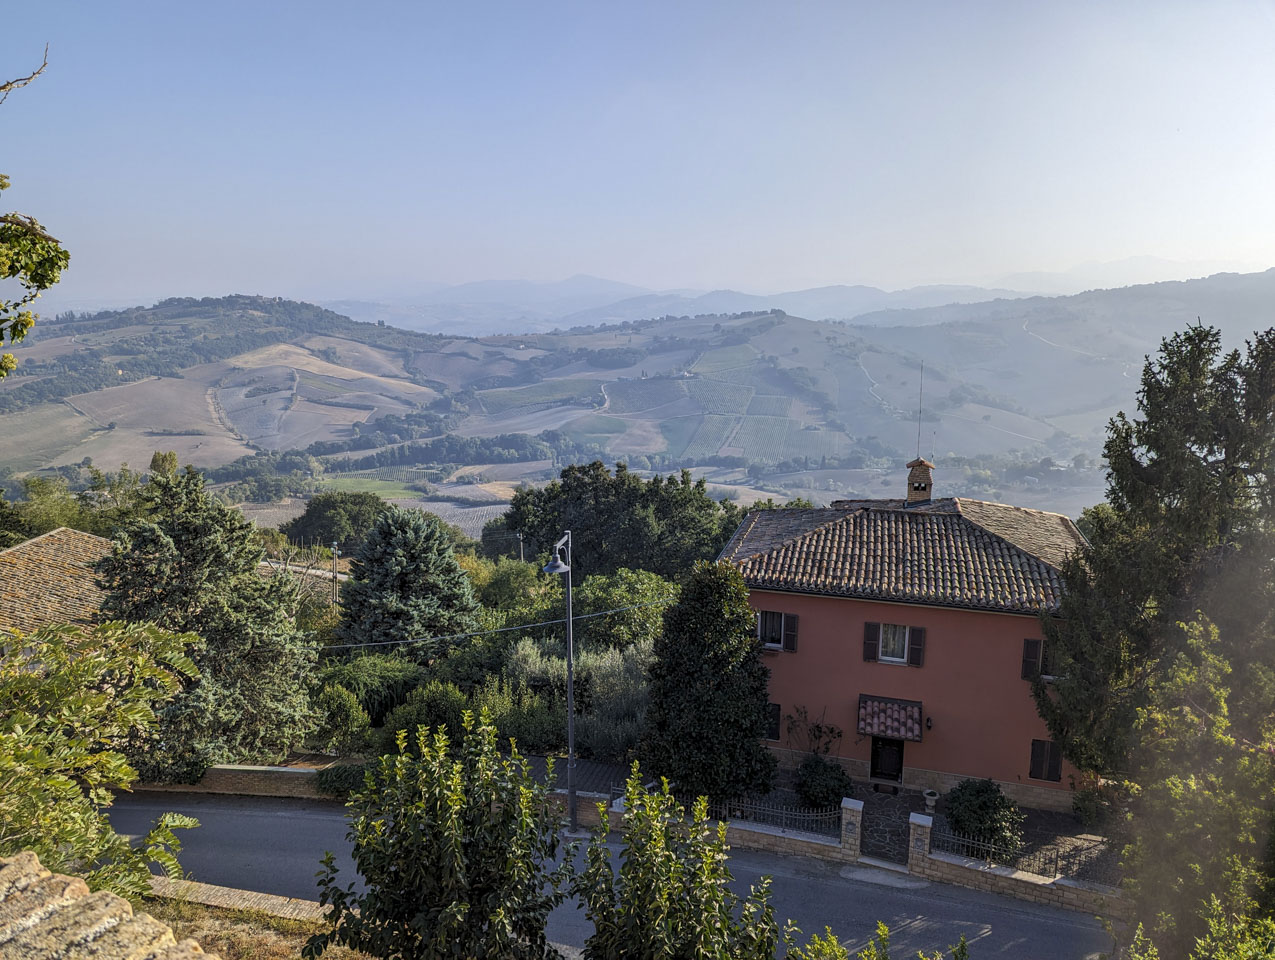 View from Fratte Rosa, Le Marche, Italy